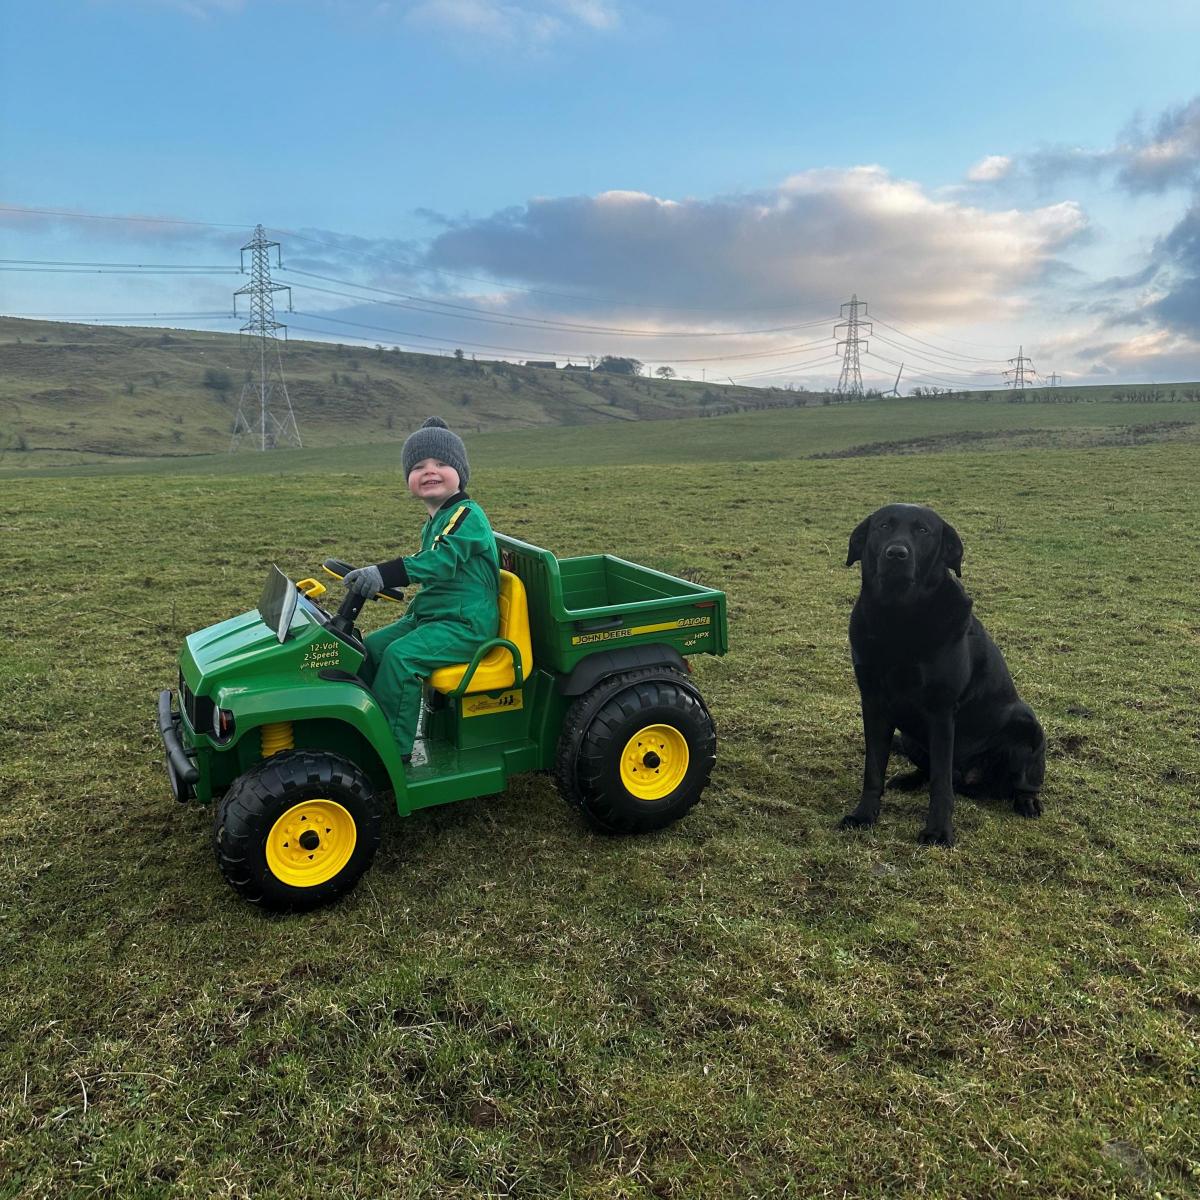 Hamish MacLeod (Cowdonmoor Farm, Uplawmoor) - Out checking all is well on the farm with a trusty four legged friend